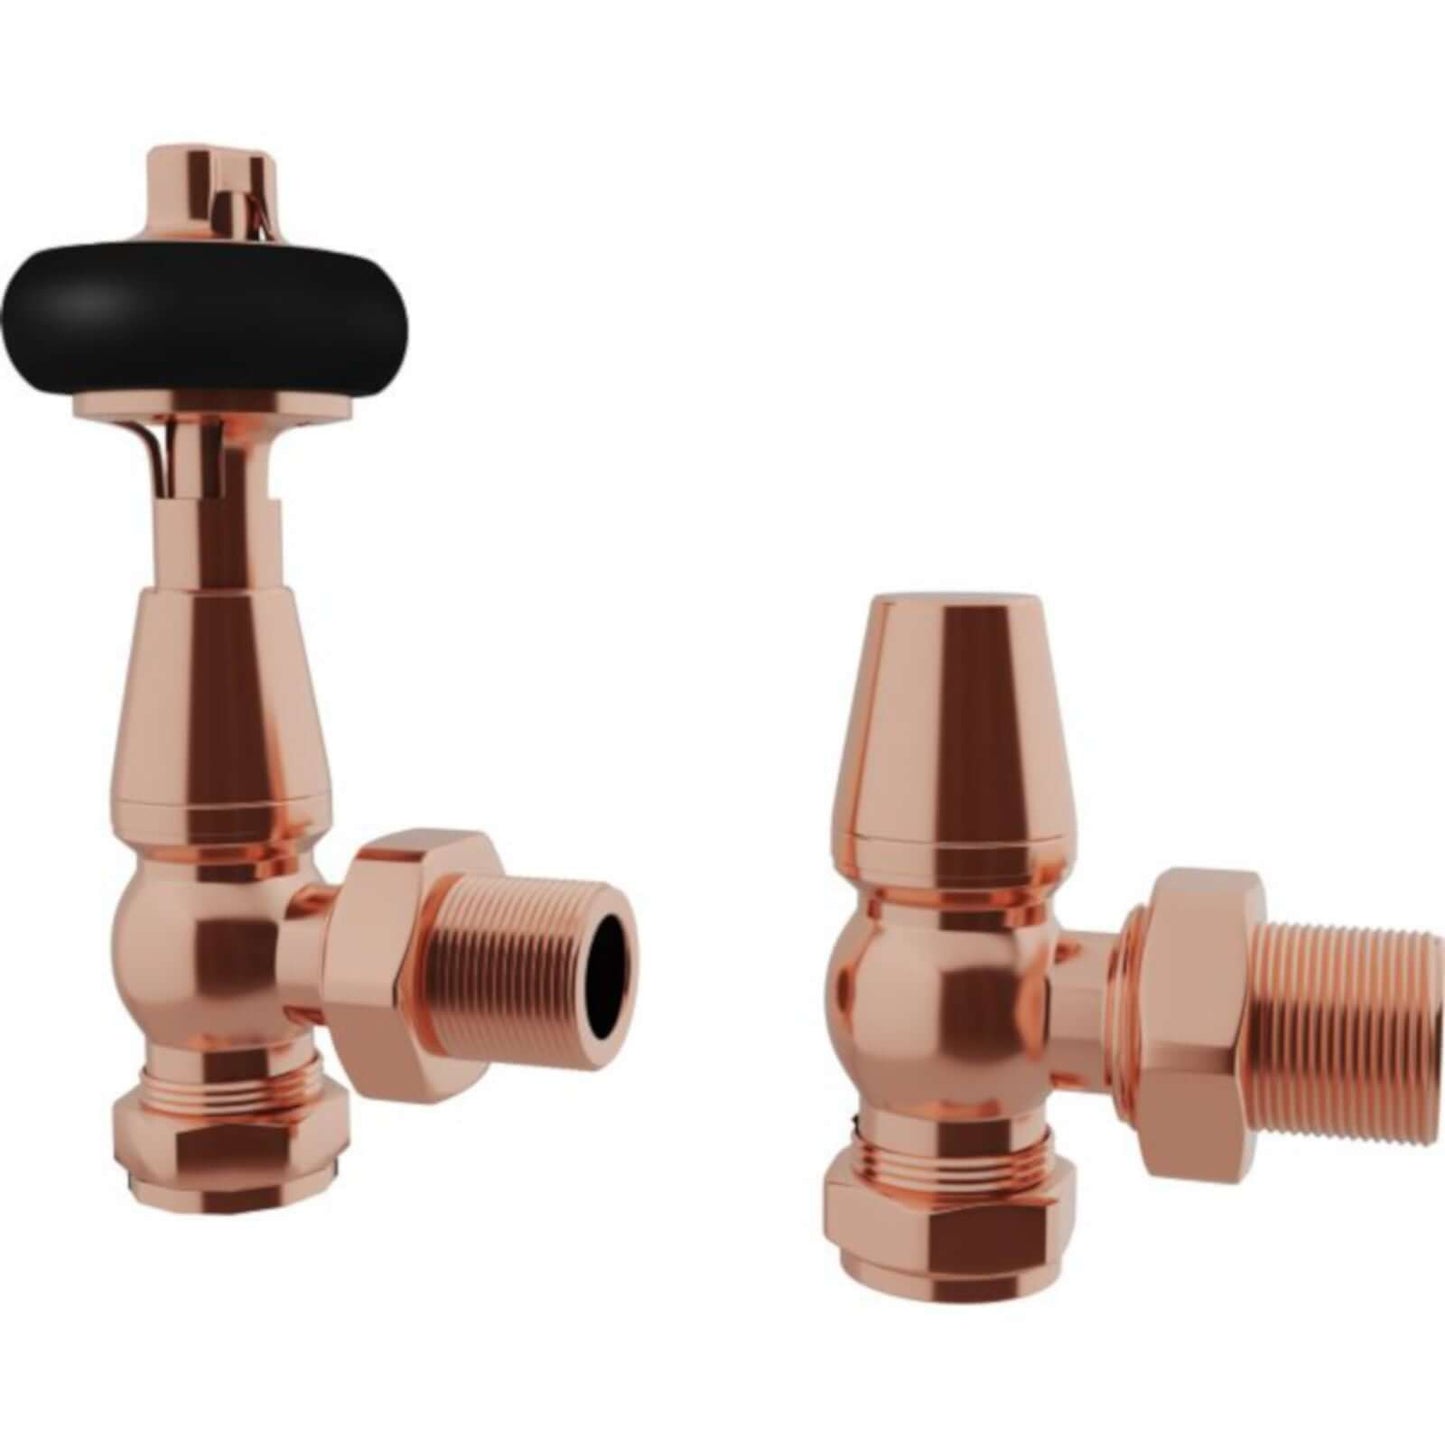 Chelsea traditional thermostatic angled radiator valves - copper rose gold - Heating